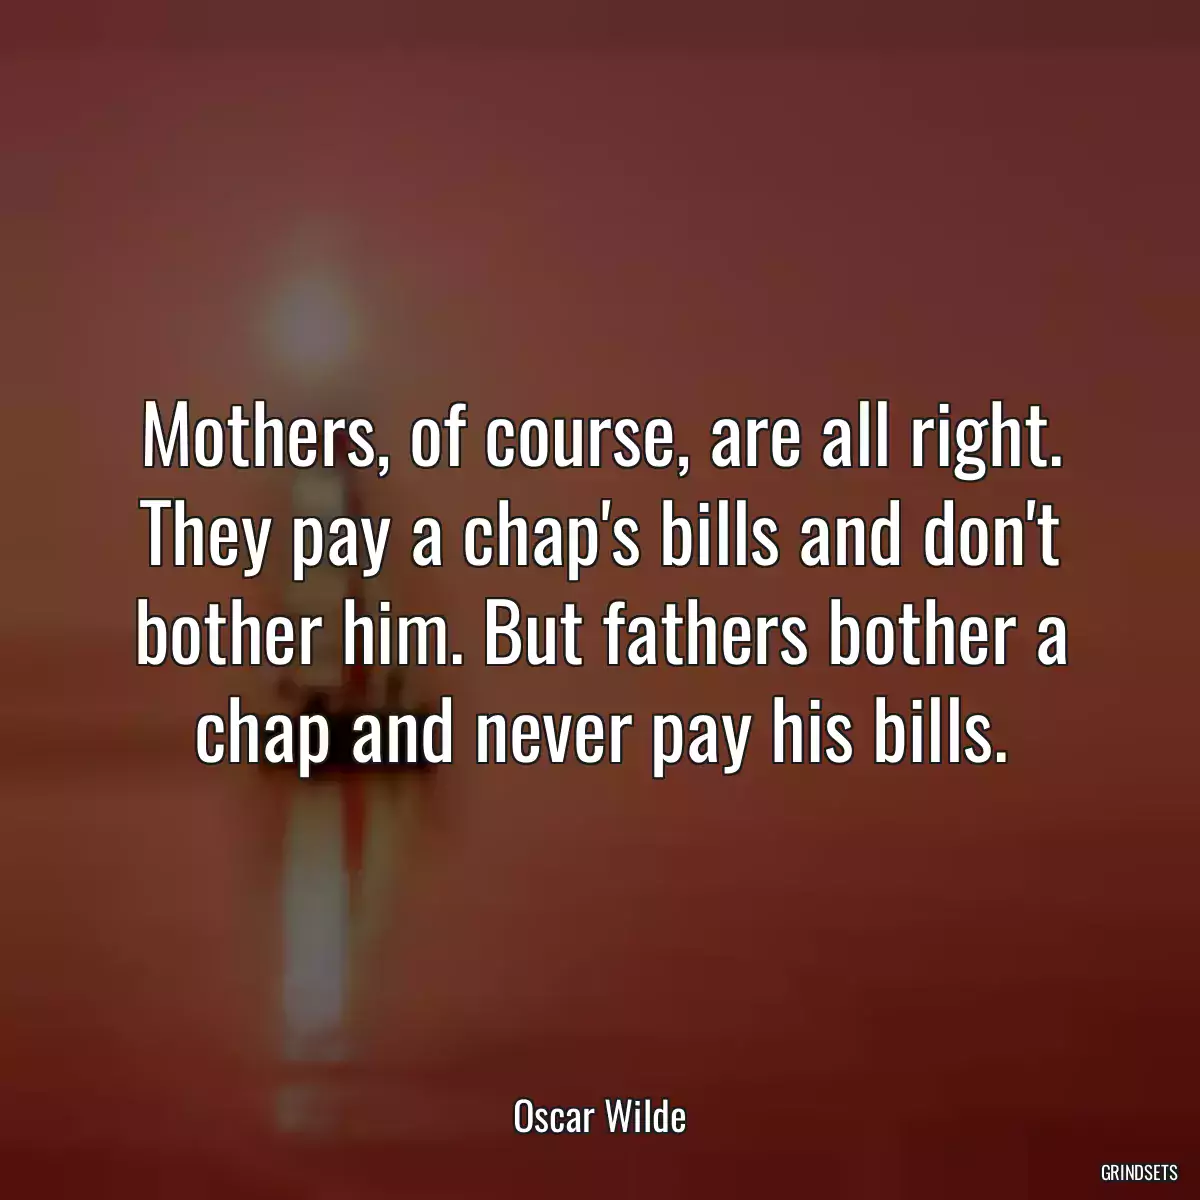 Mothers, of course, are all right. They pay a chap\'s bills and don\'t bother him. But fathers bother a chap and never pay his bills.